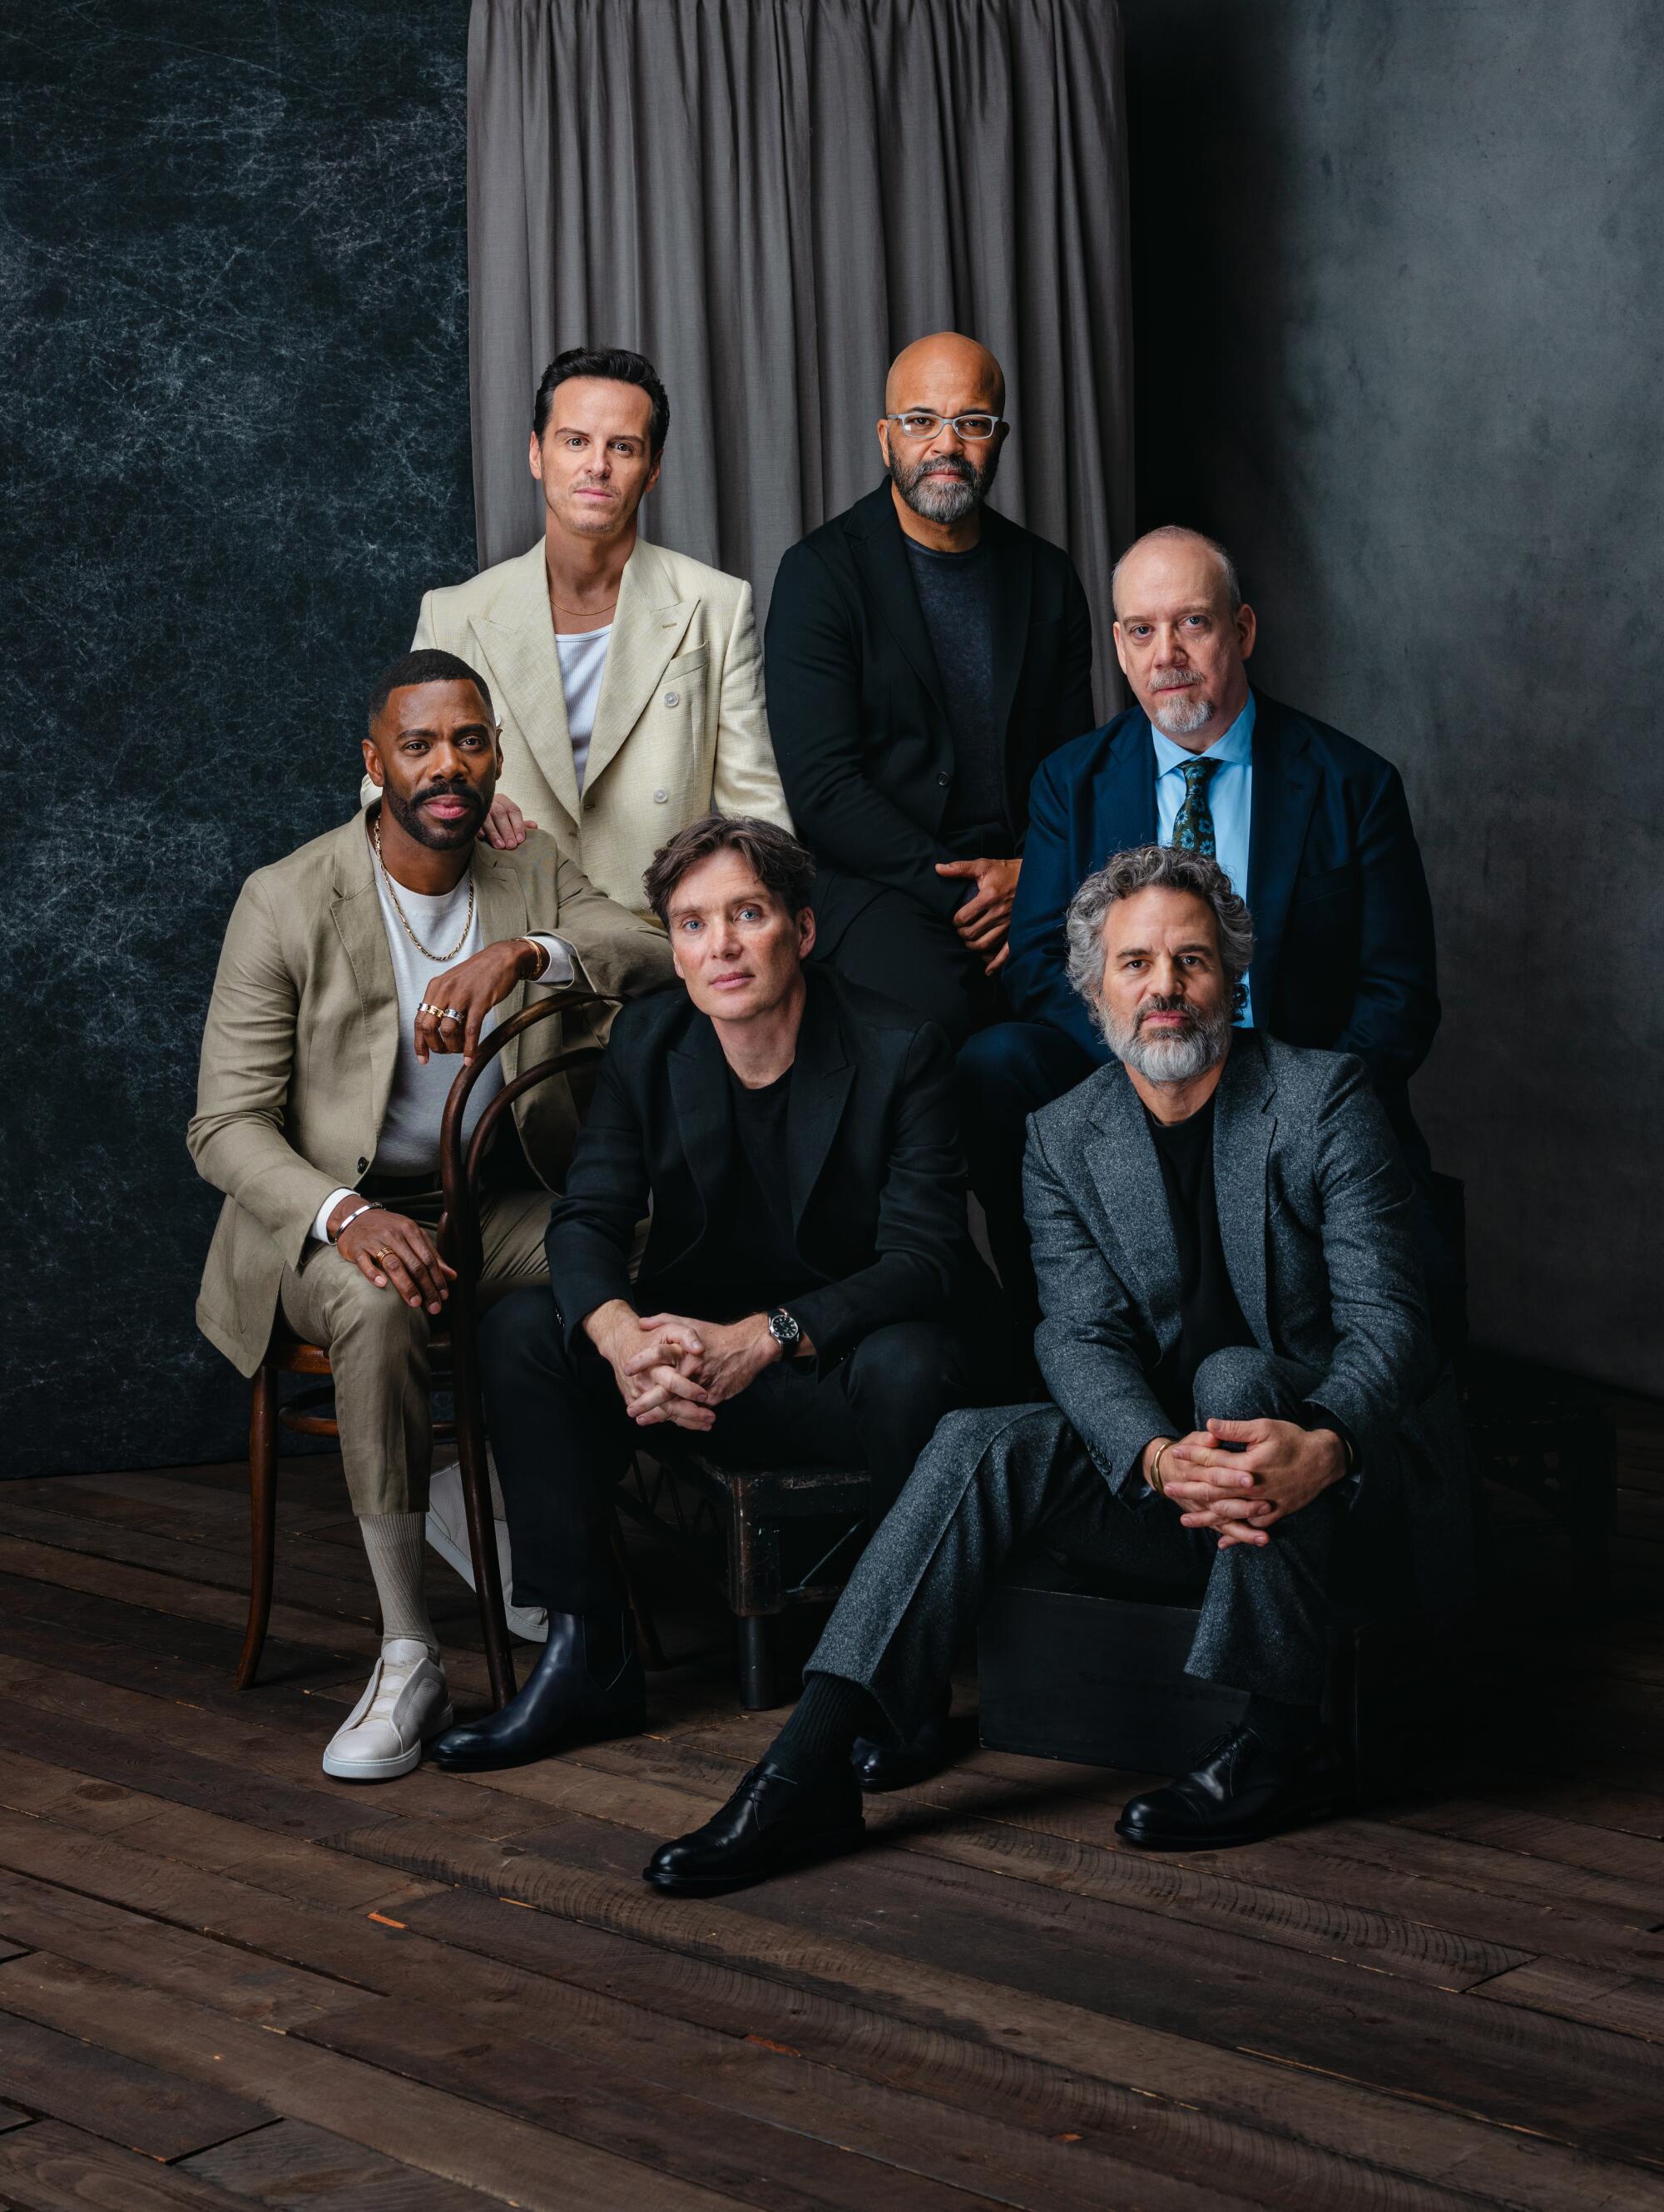 Six acclaimed performers pose together in front of a dark background for the 2023 Envelope Actors Roundtable.